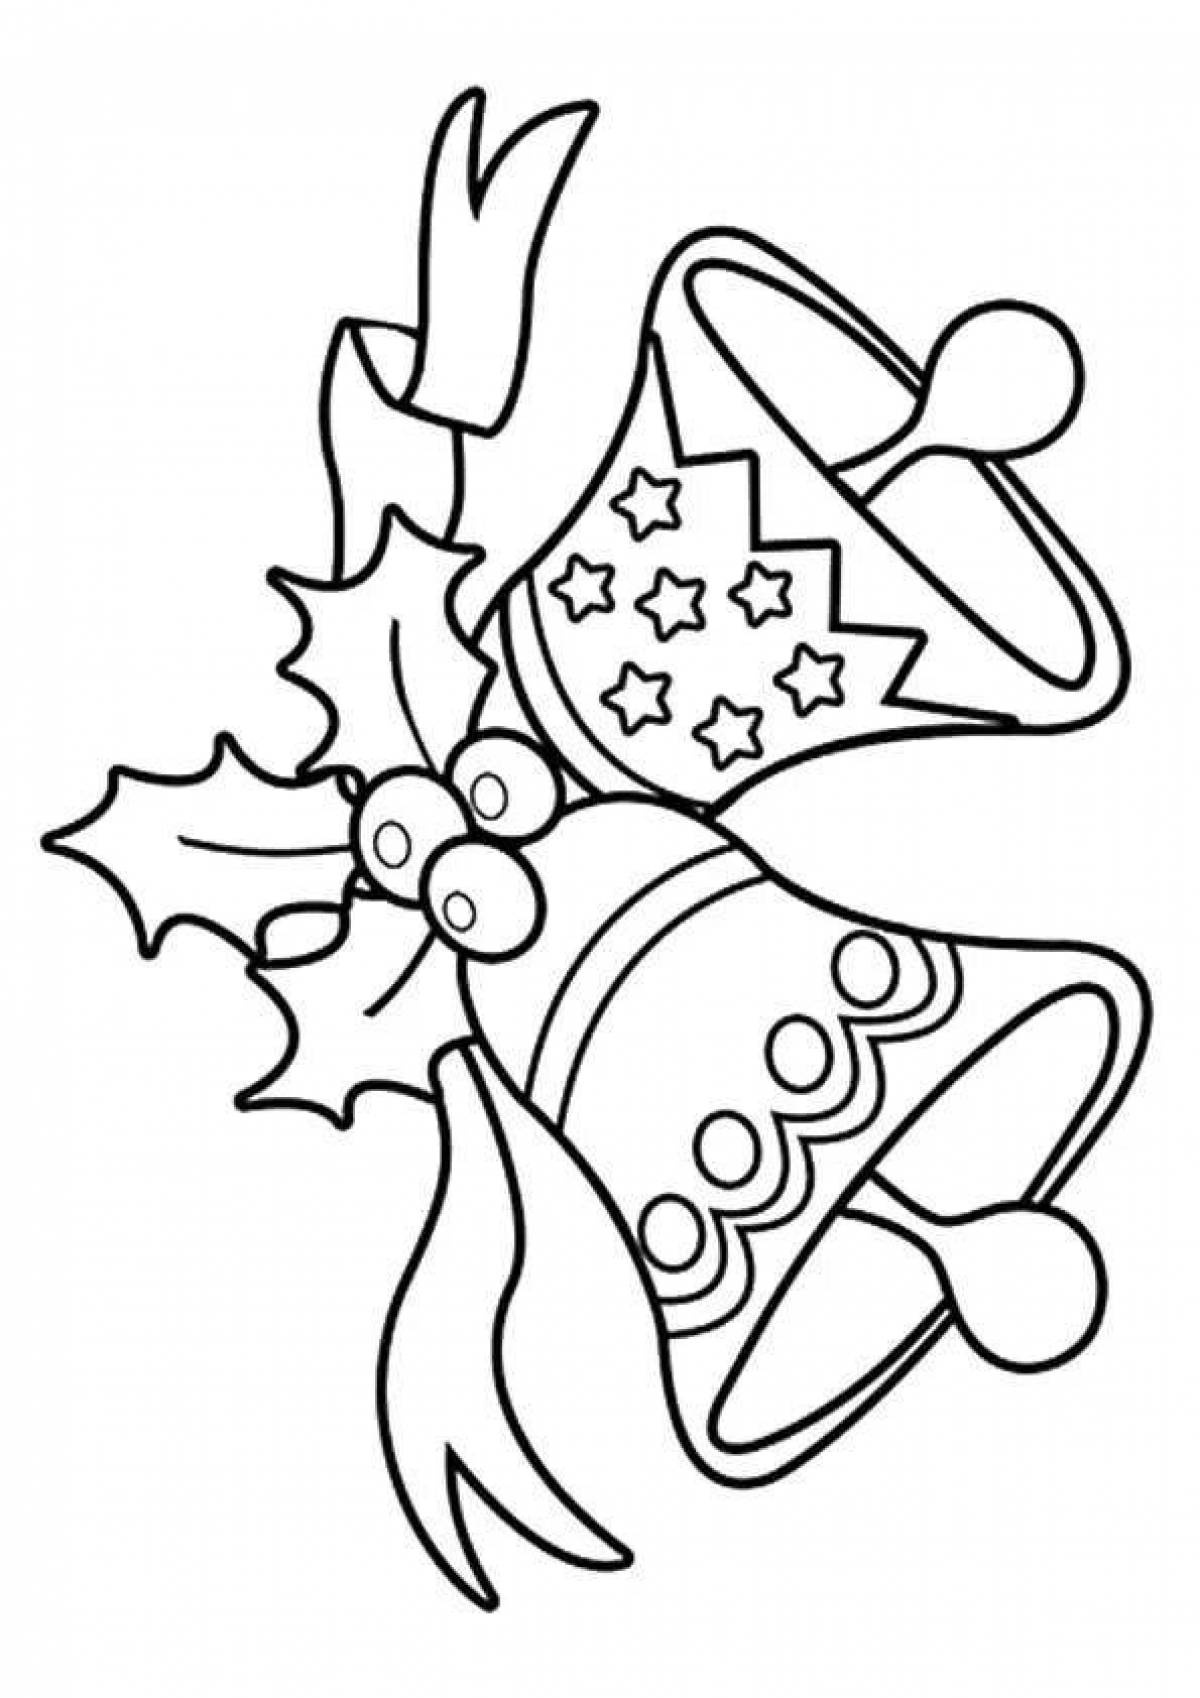 Coloring book dazzling Christmas bell